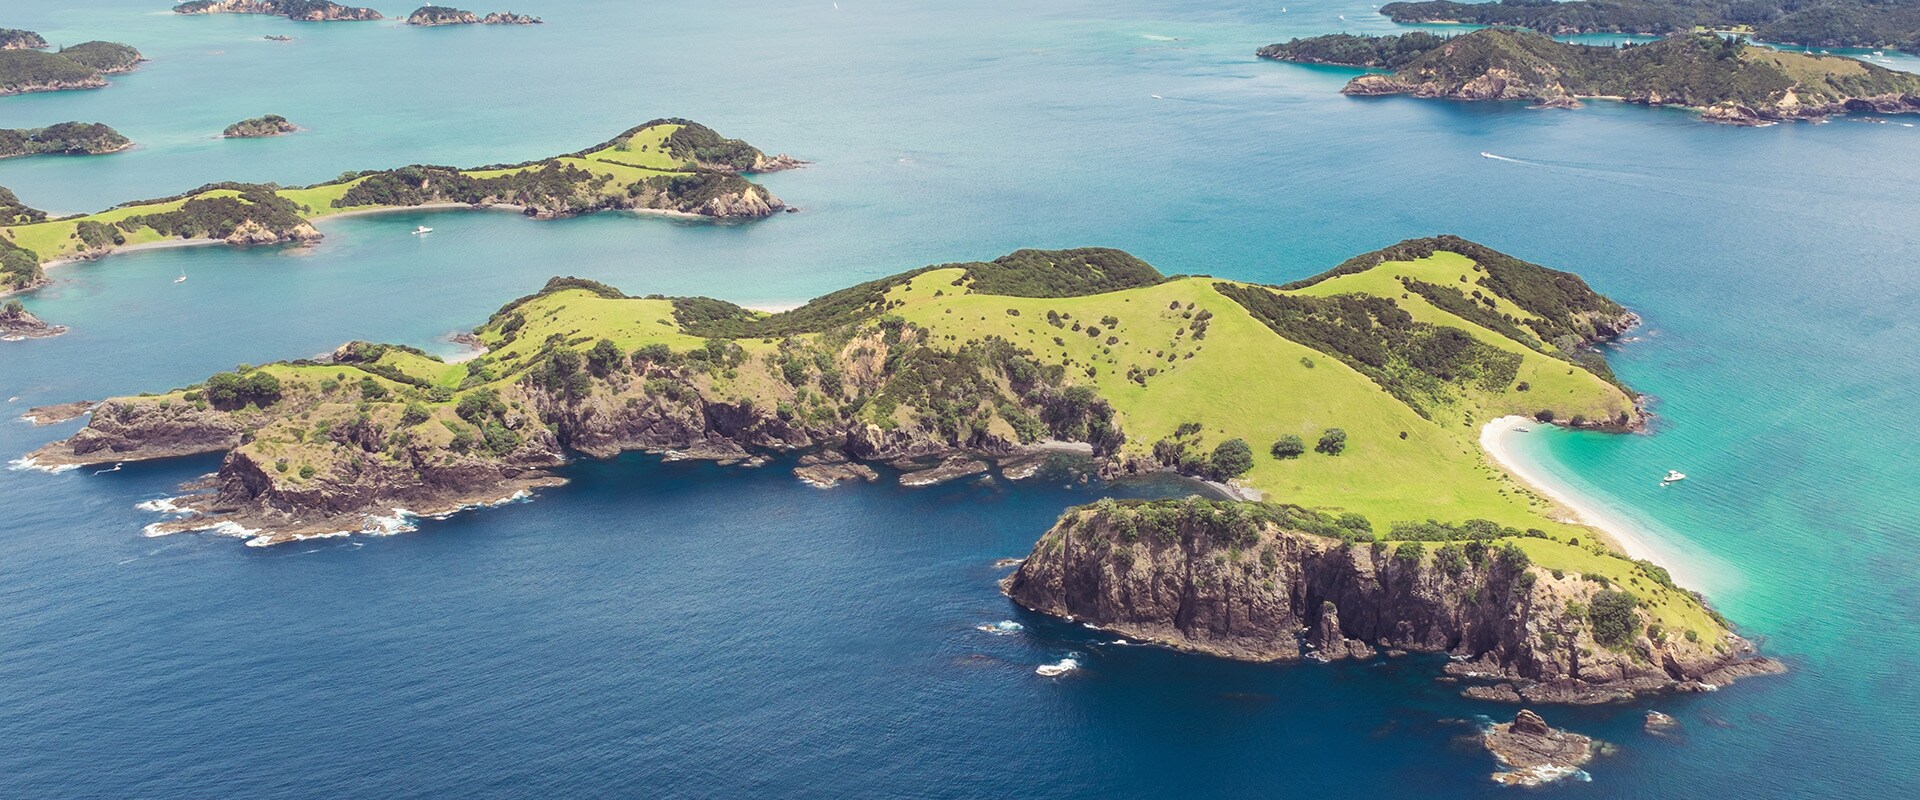 Aerial view of Bay of Islands, North Island, New Zealand